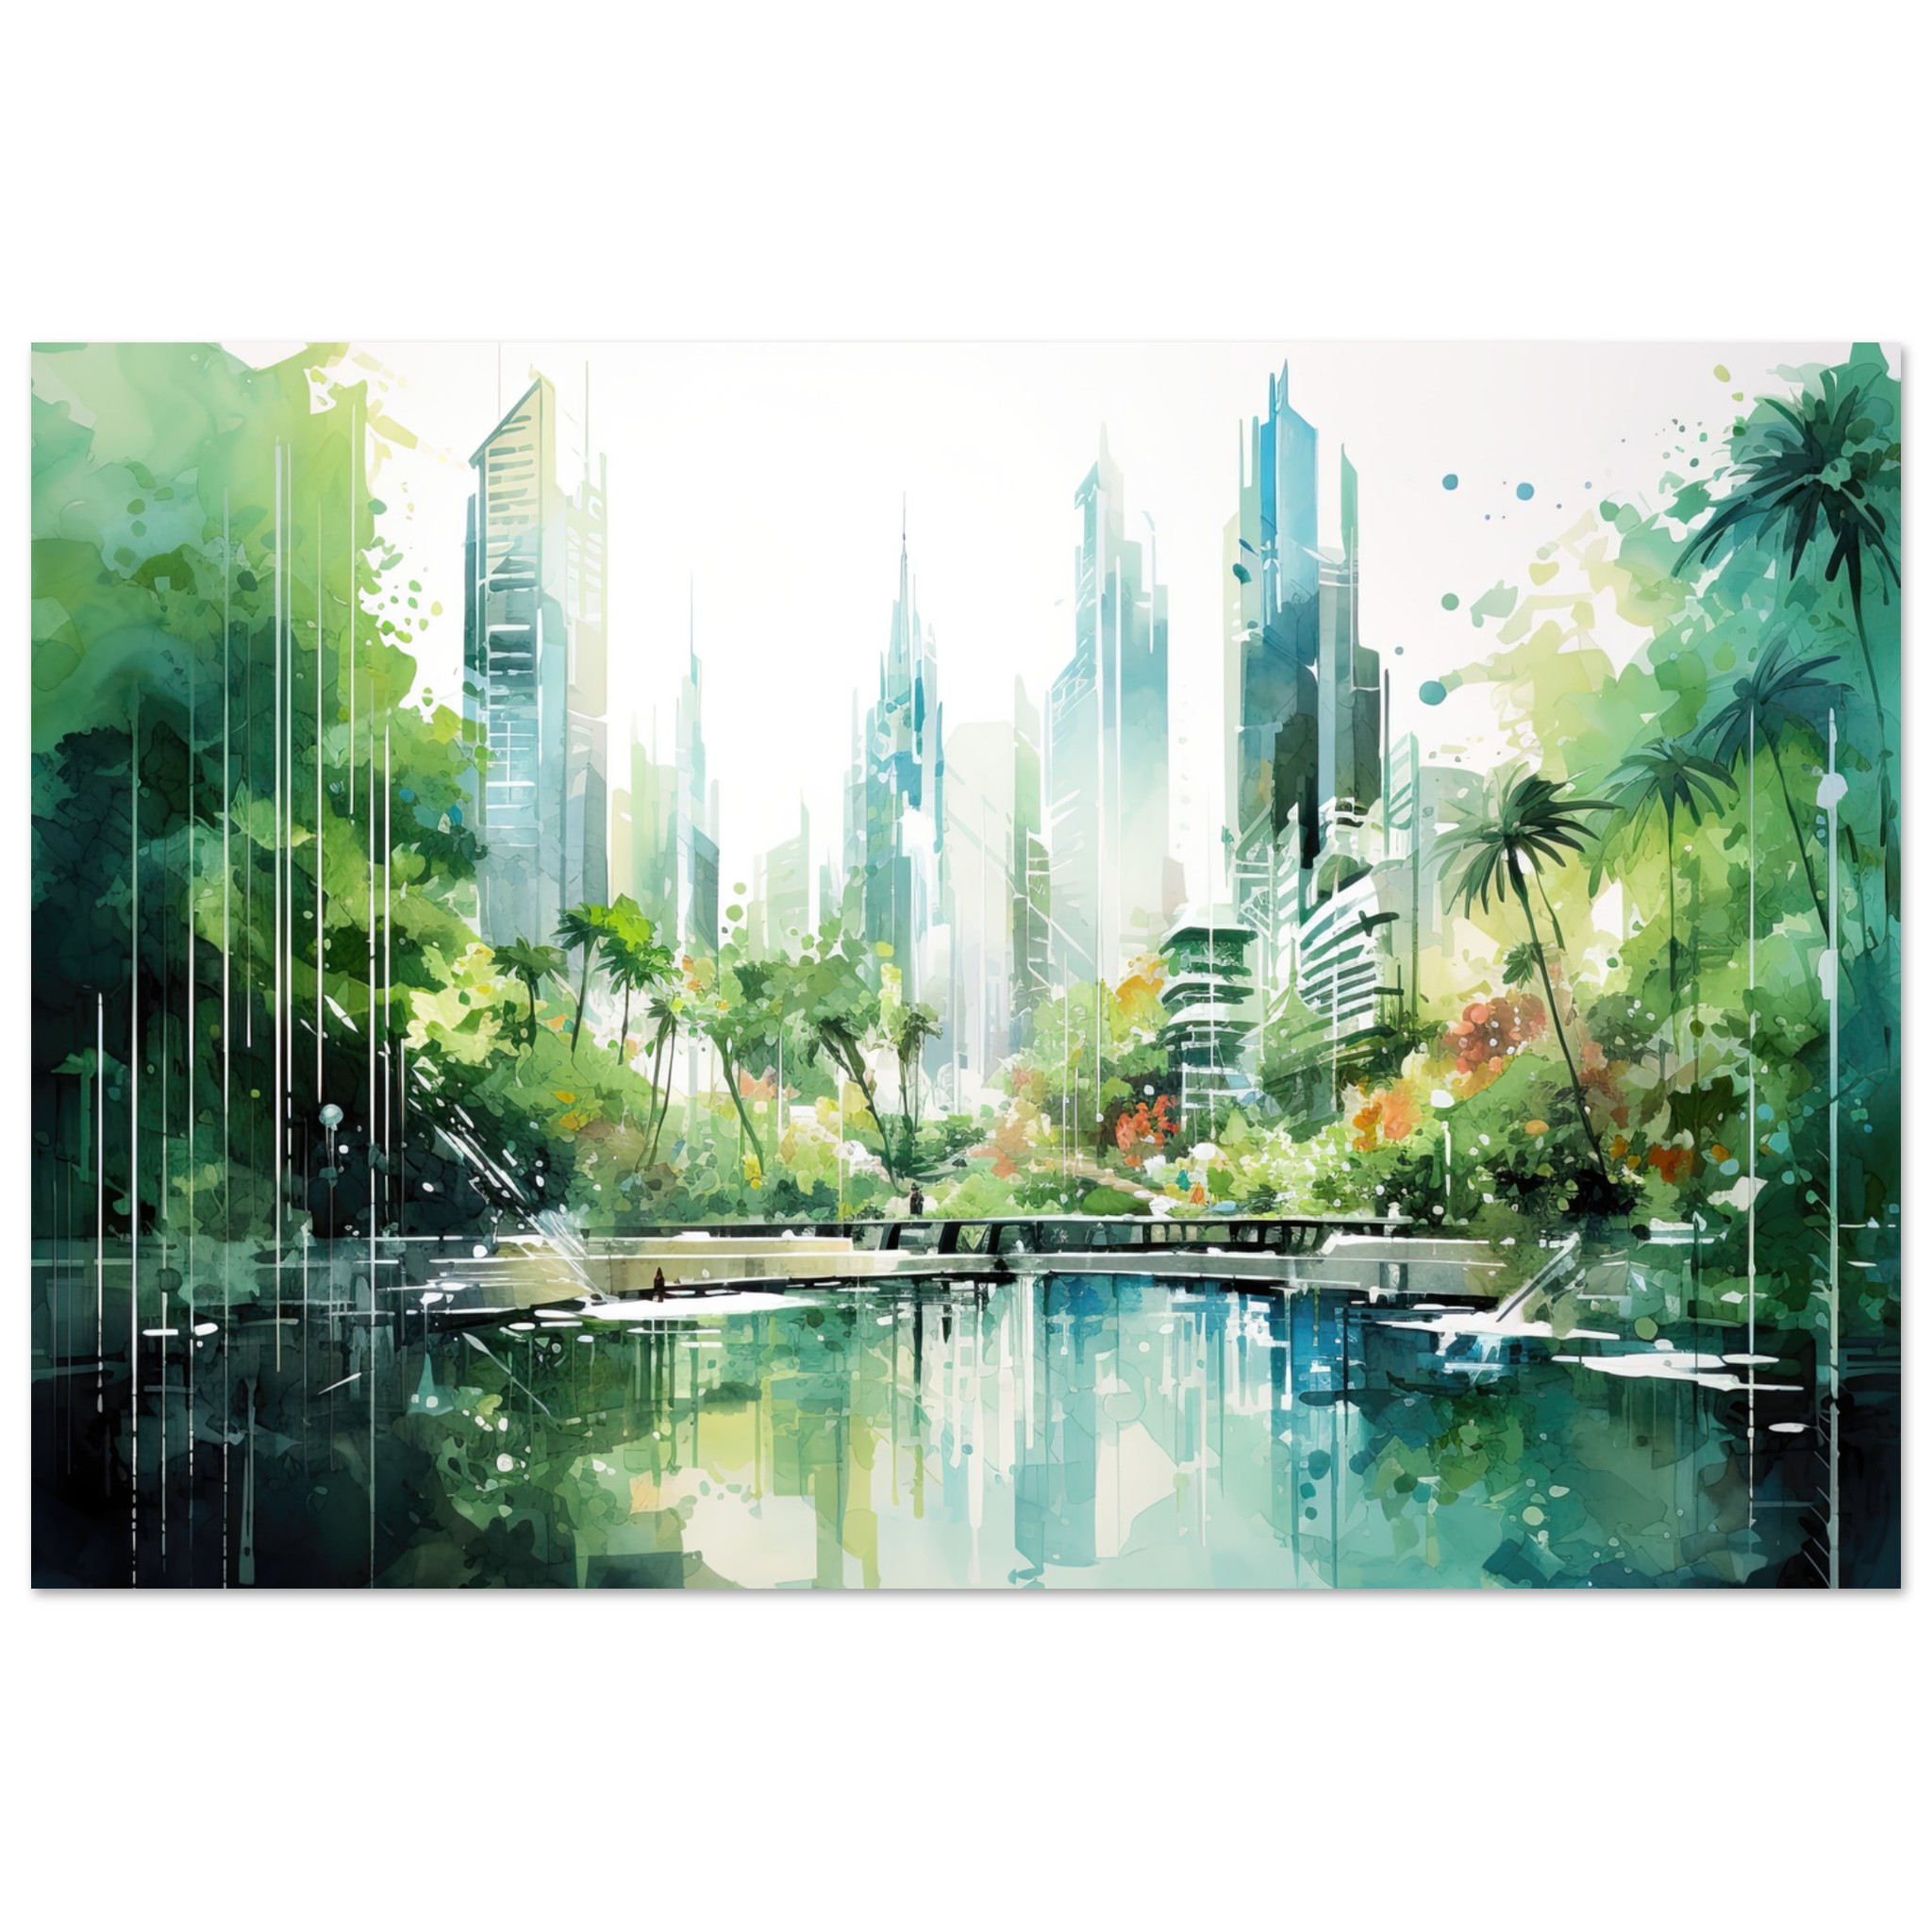 Rainy City Day Watercolor Poster – 30×45 cm / 12×18″